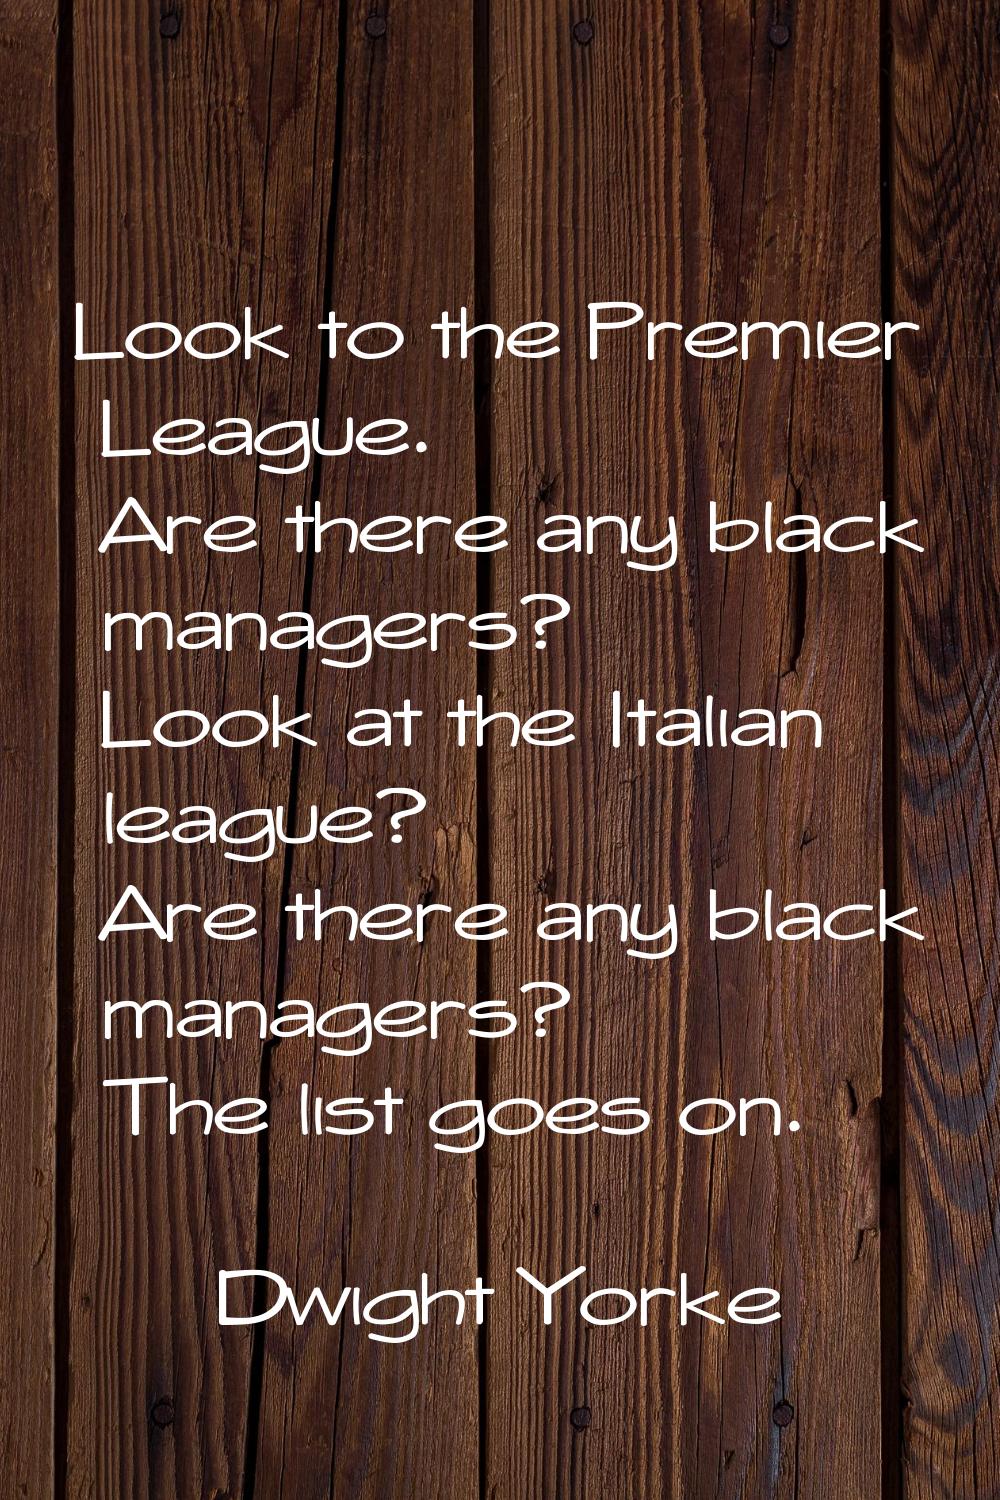 Look to the Premier League. Are there any black managers? Look at the Italian league? Are there any